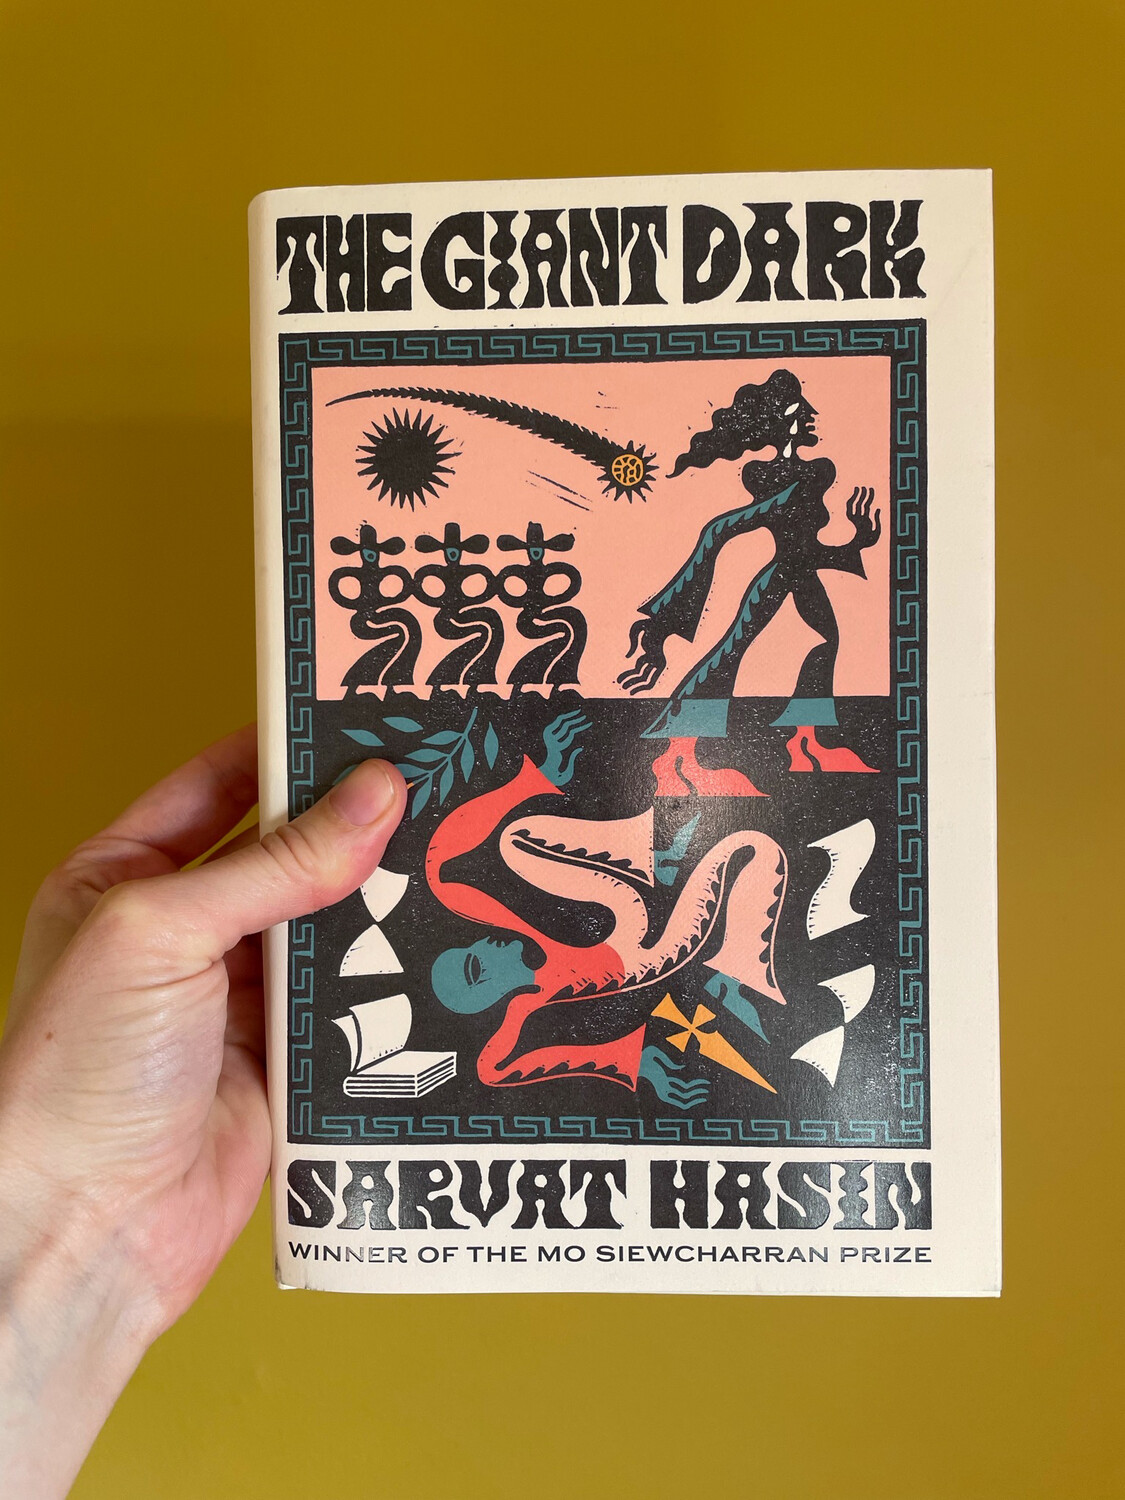 The Giant Dark By Sarvat Hasin